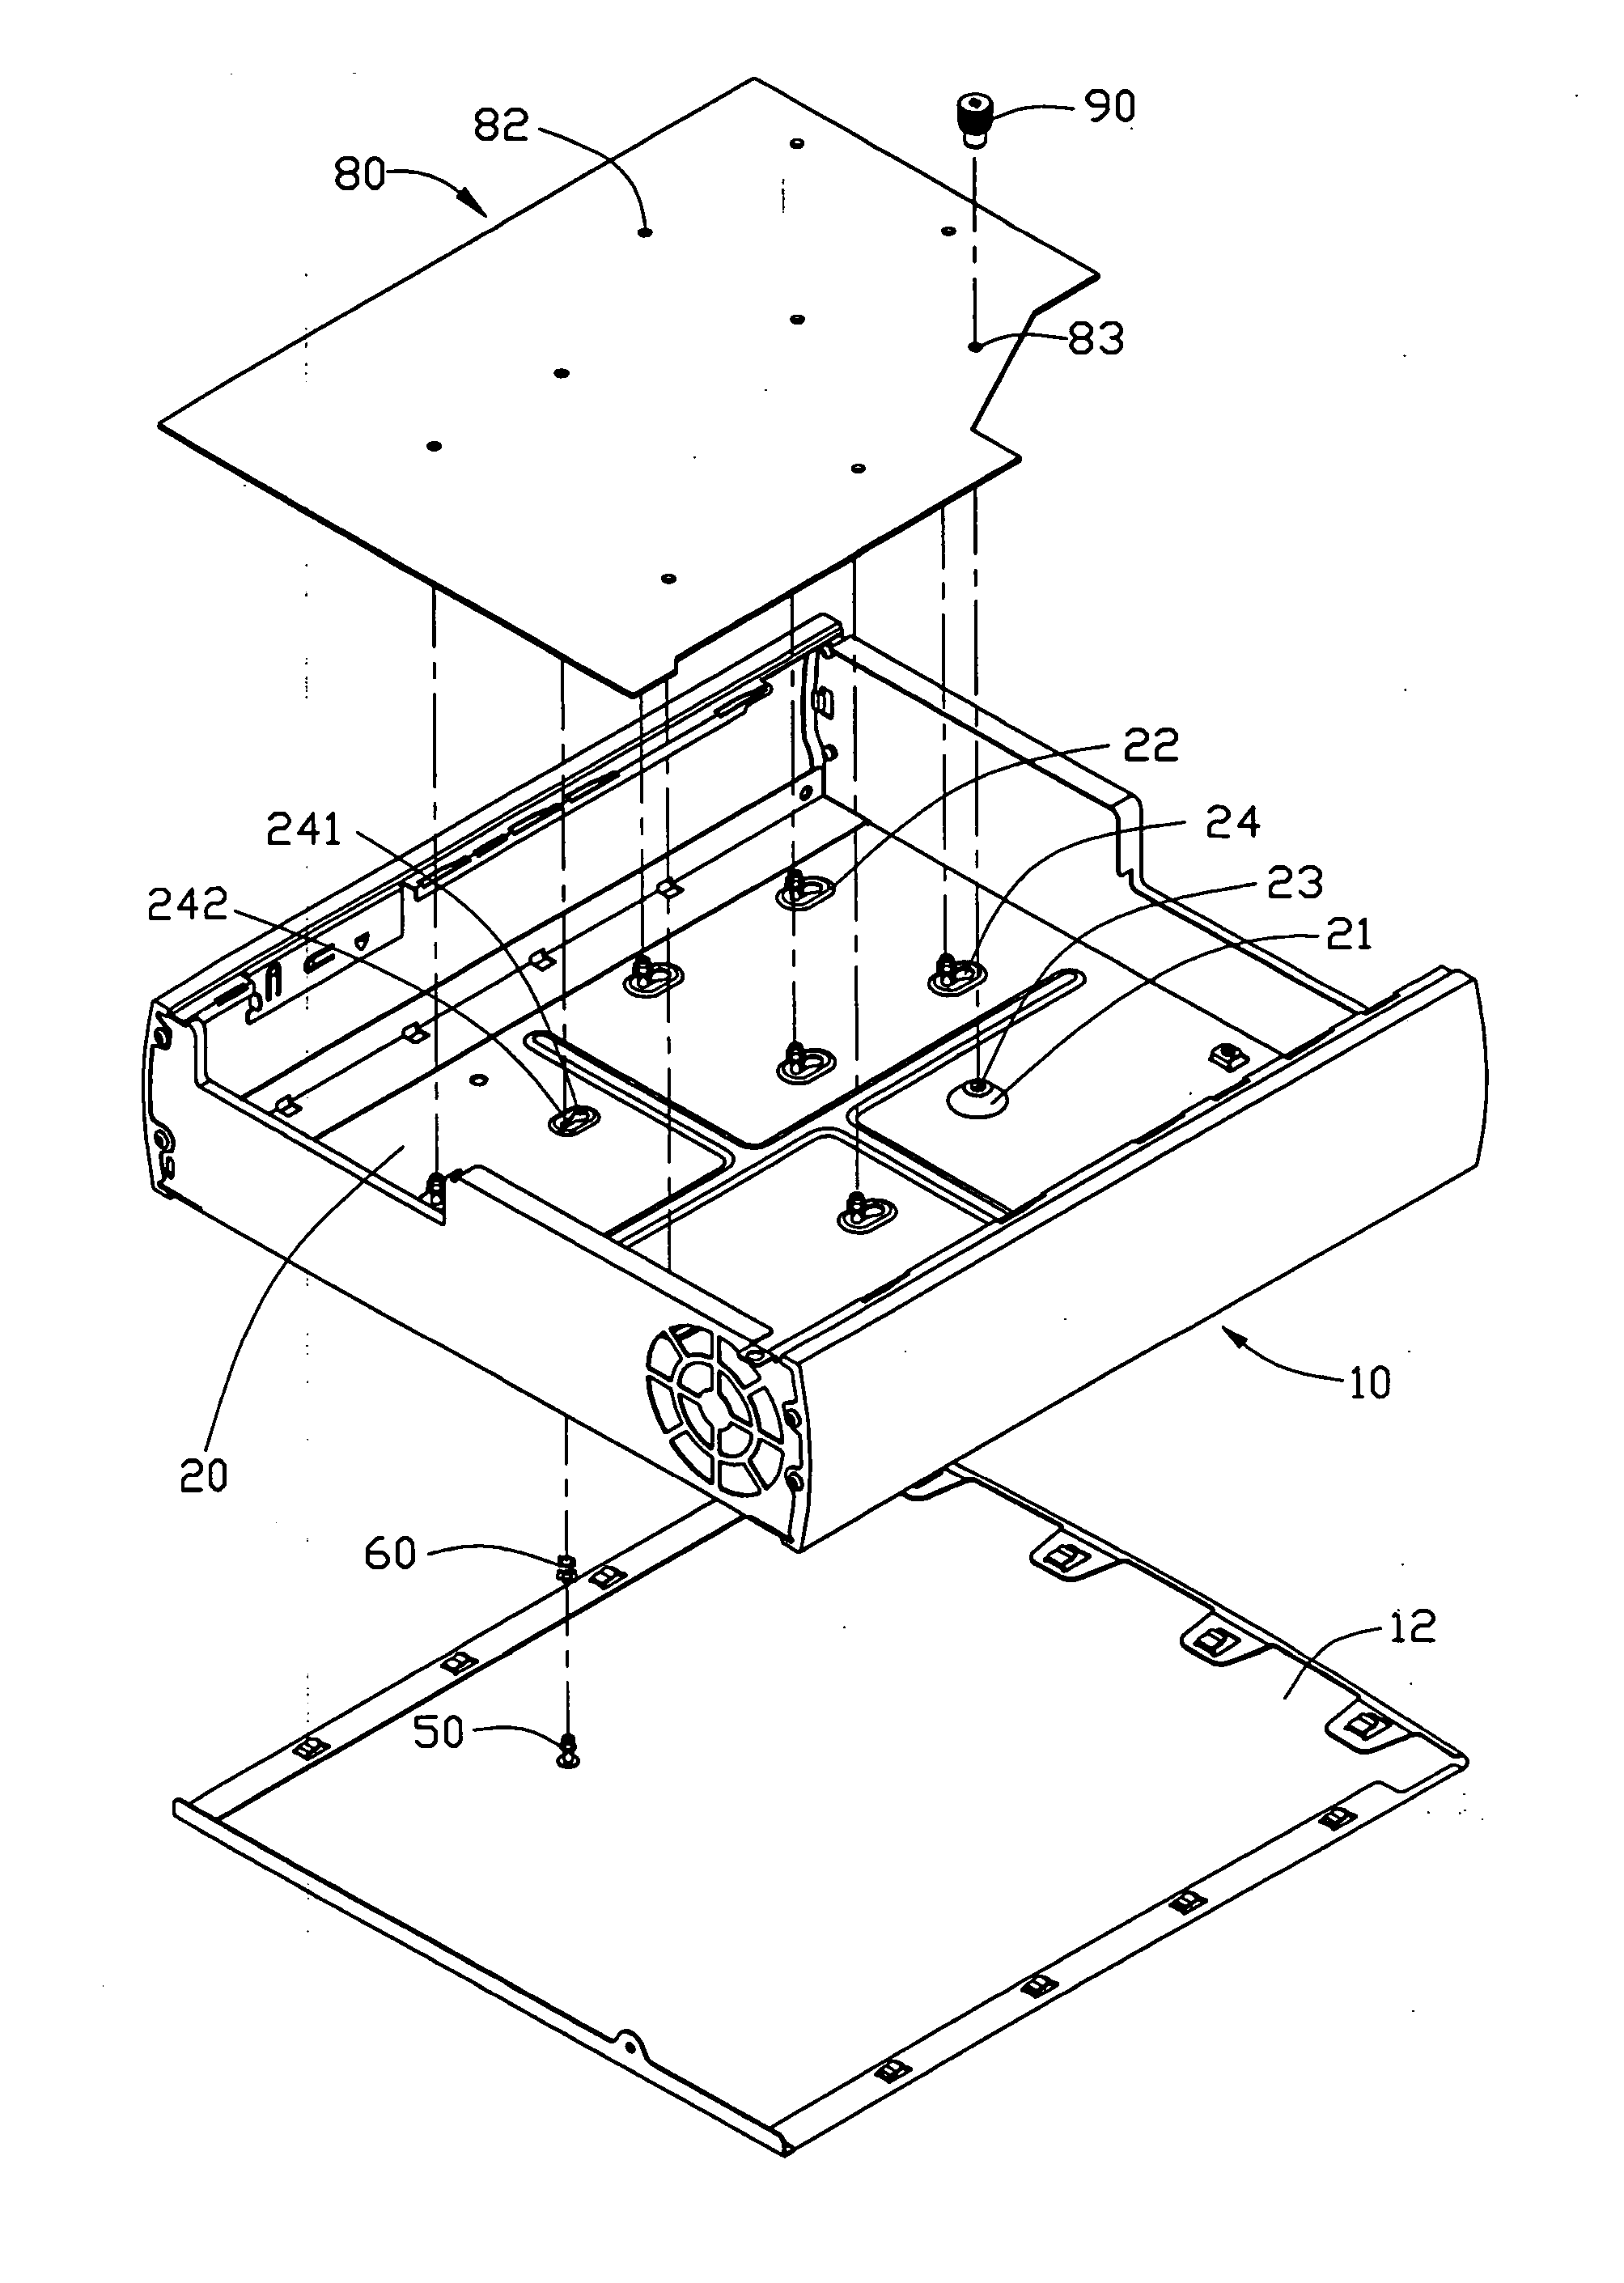 Mounting apparatus for PCB